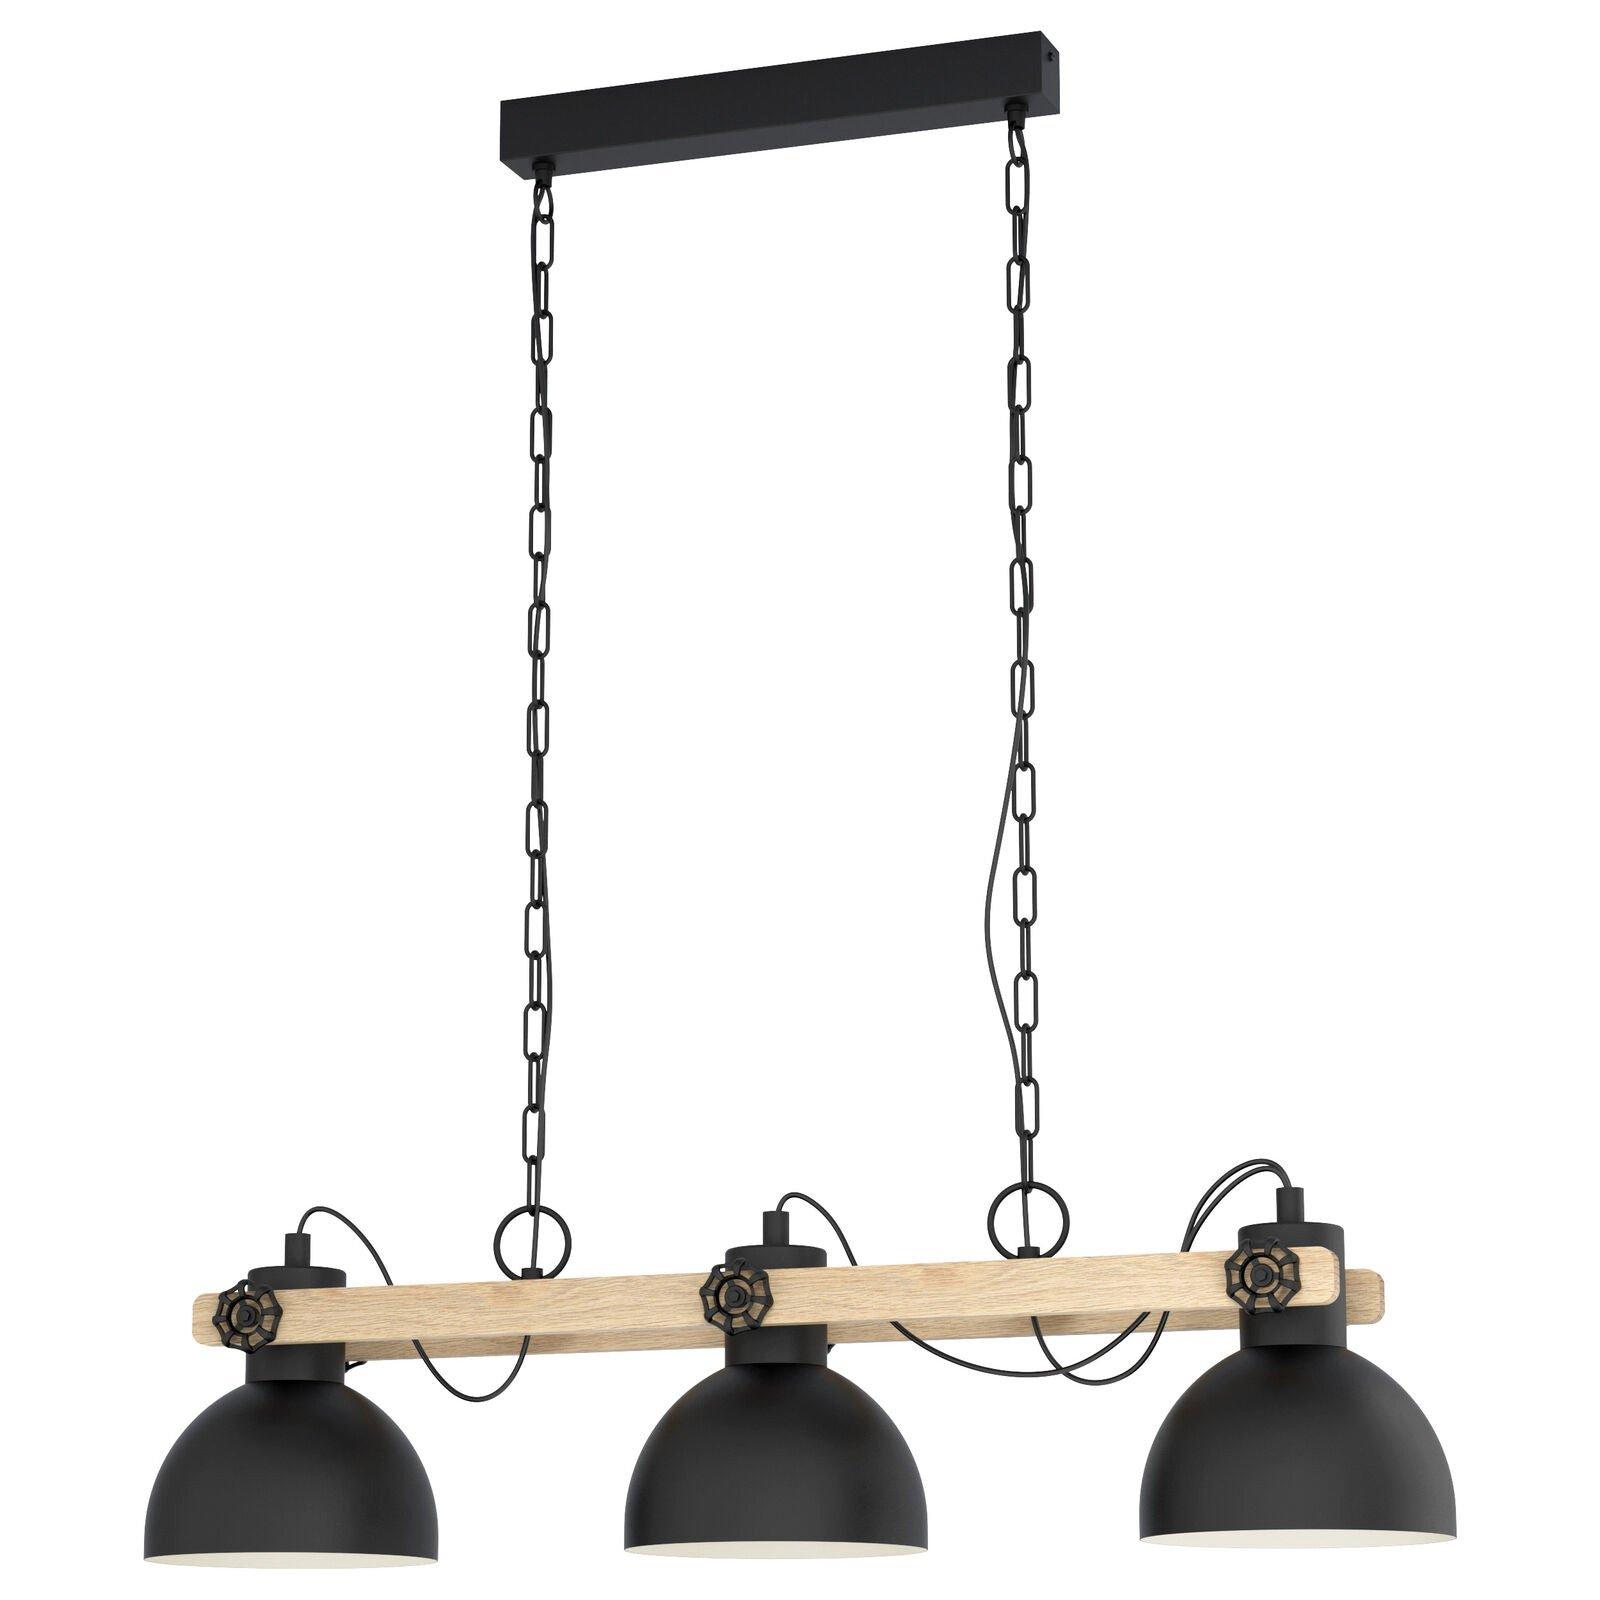 Hanging Ceiling Pendant Light Black & Wood Industrial Shade 3 Bulb Dining Lamp